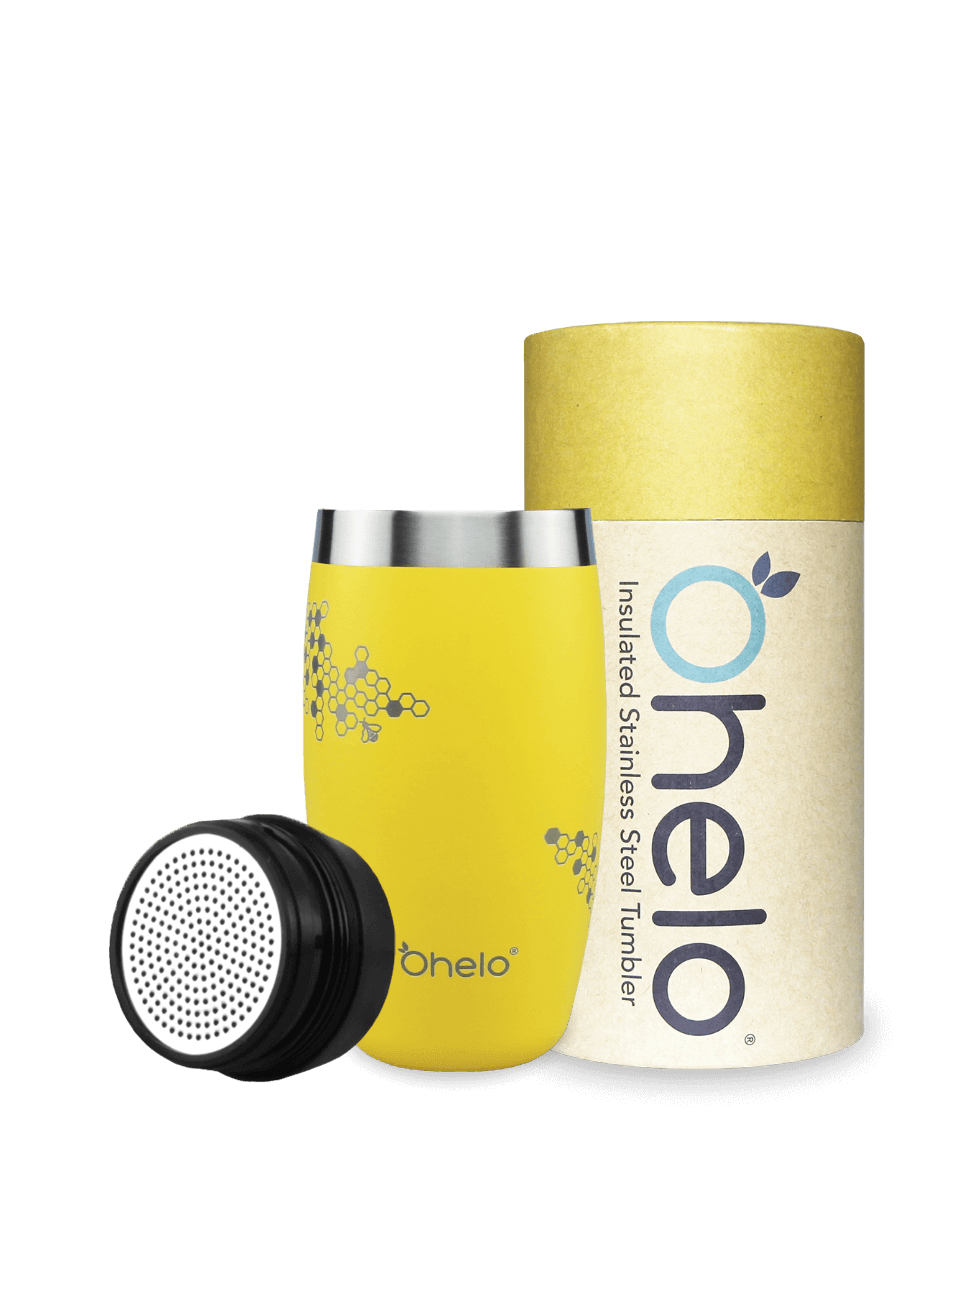 Ohelo BPA free reusable coffee cup in yellow with bee design with recycled packaging